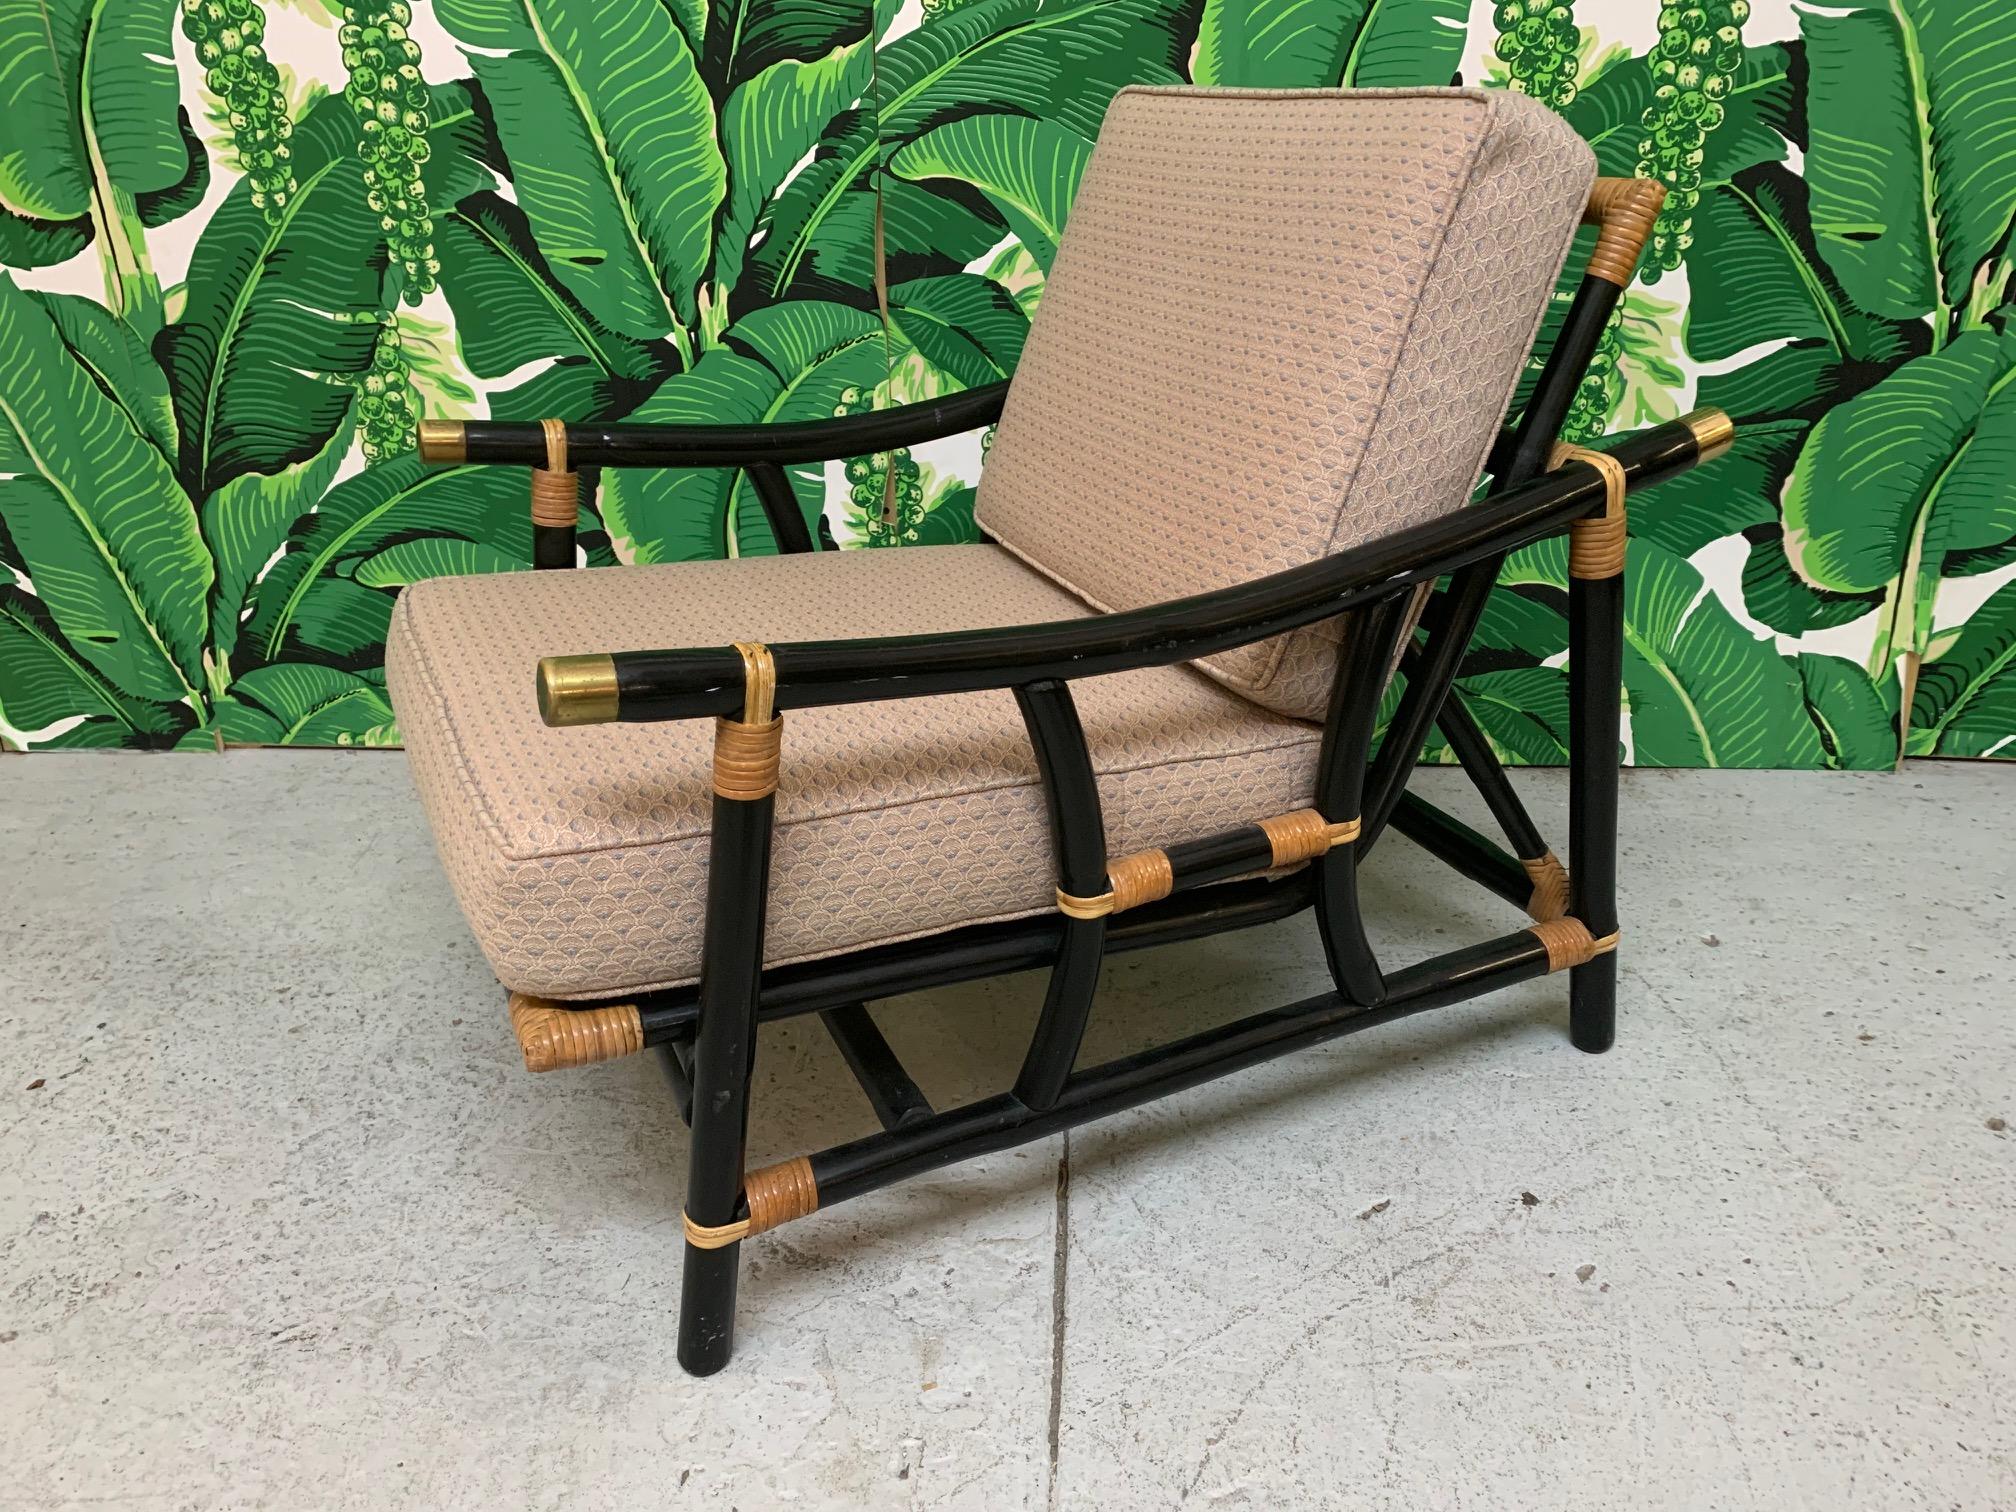 Rattan lounge chair features striking black finish with tan strapping. In the style of McGuire.
Very good condition with only minor imperfections consistent with age.  S8841